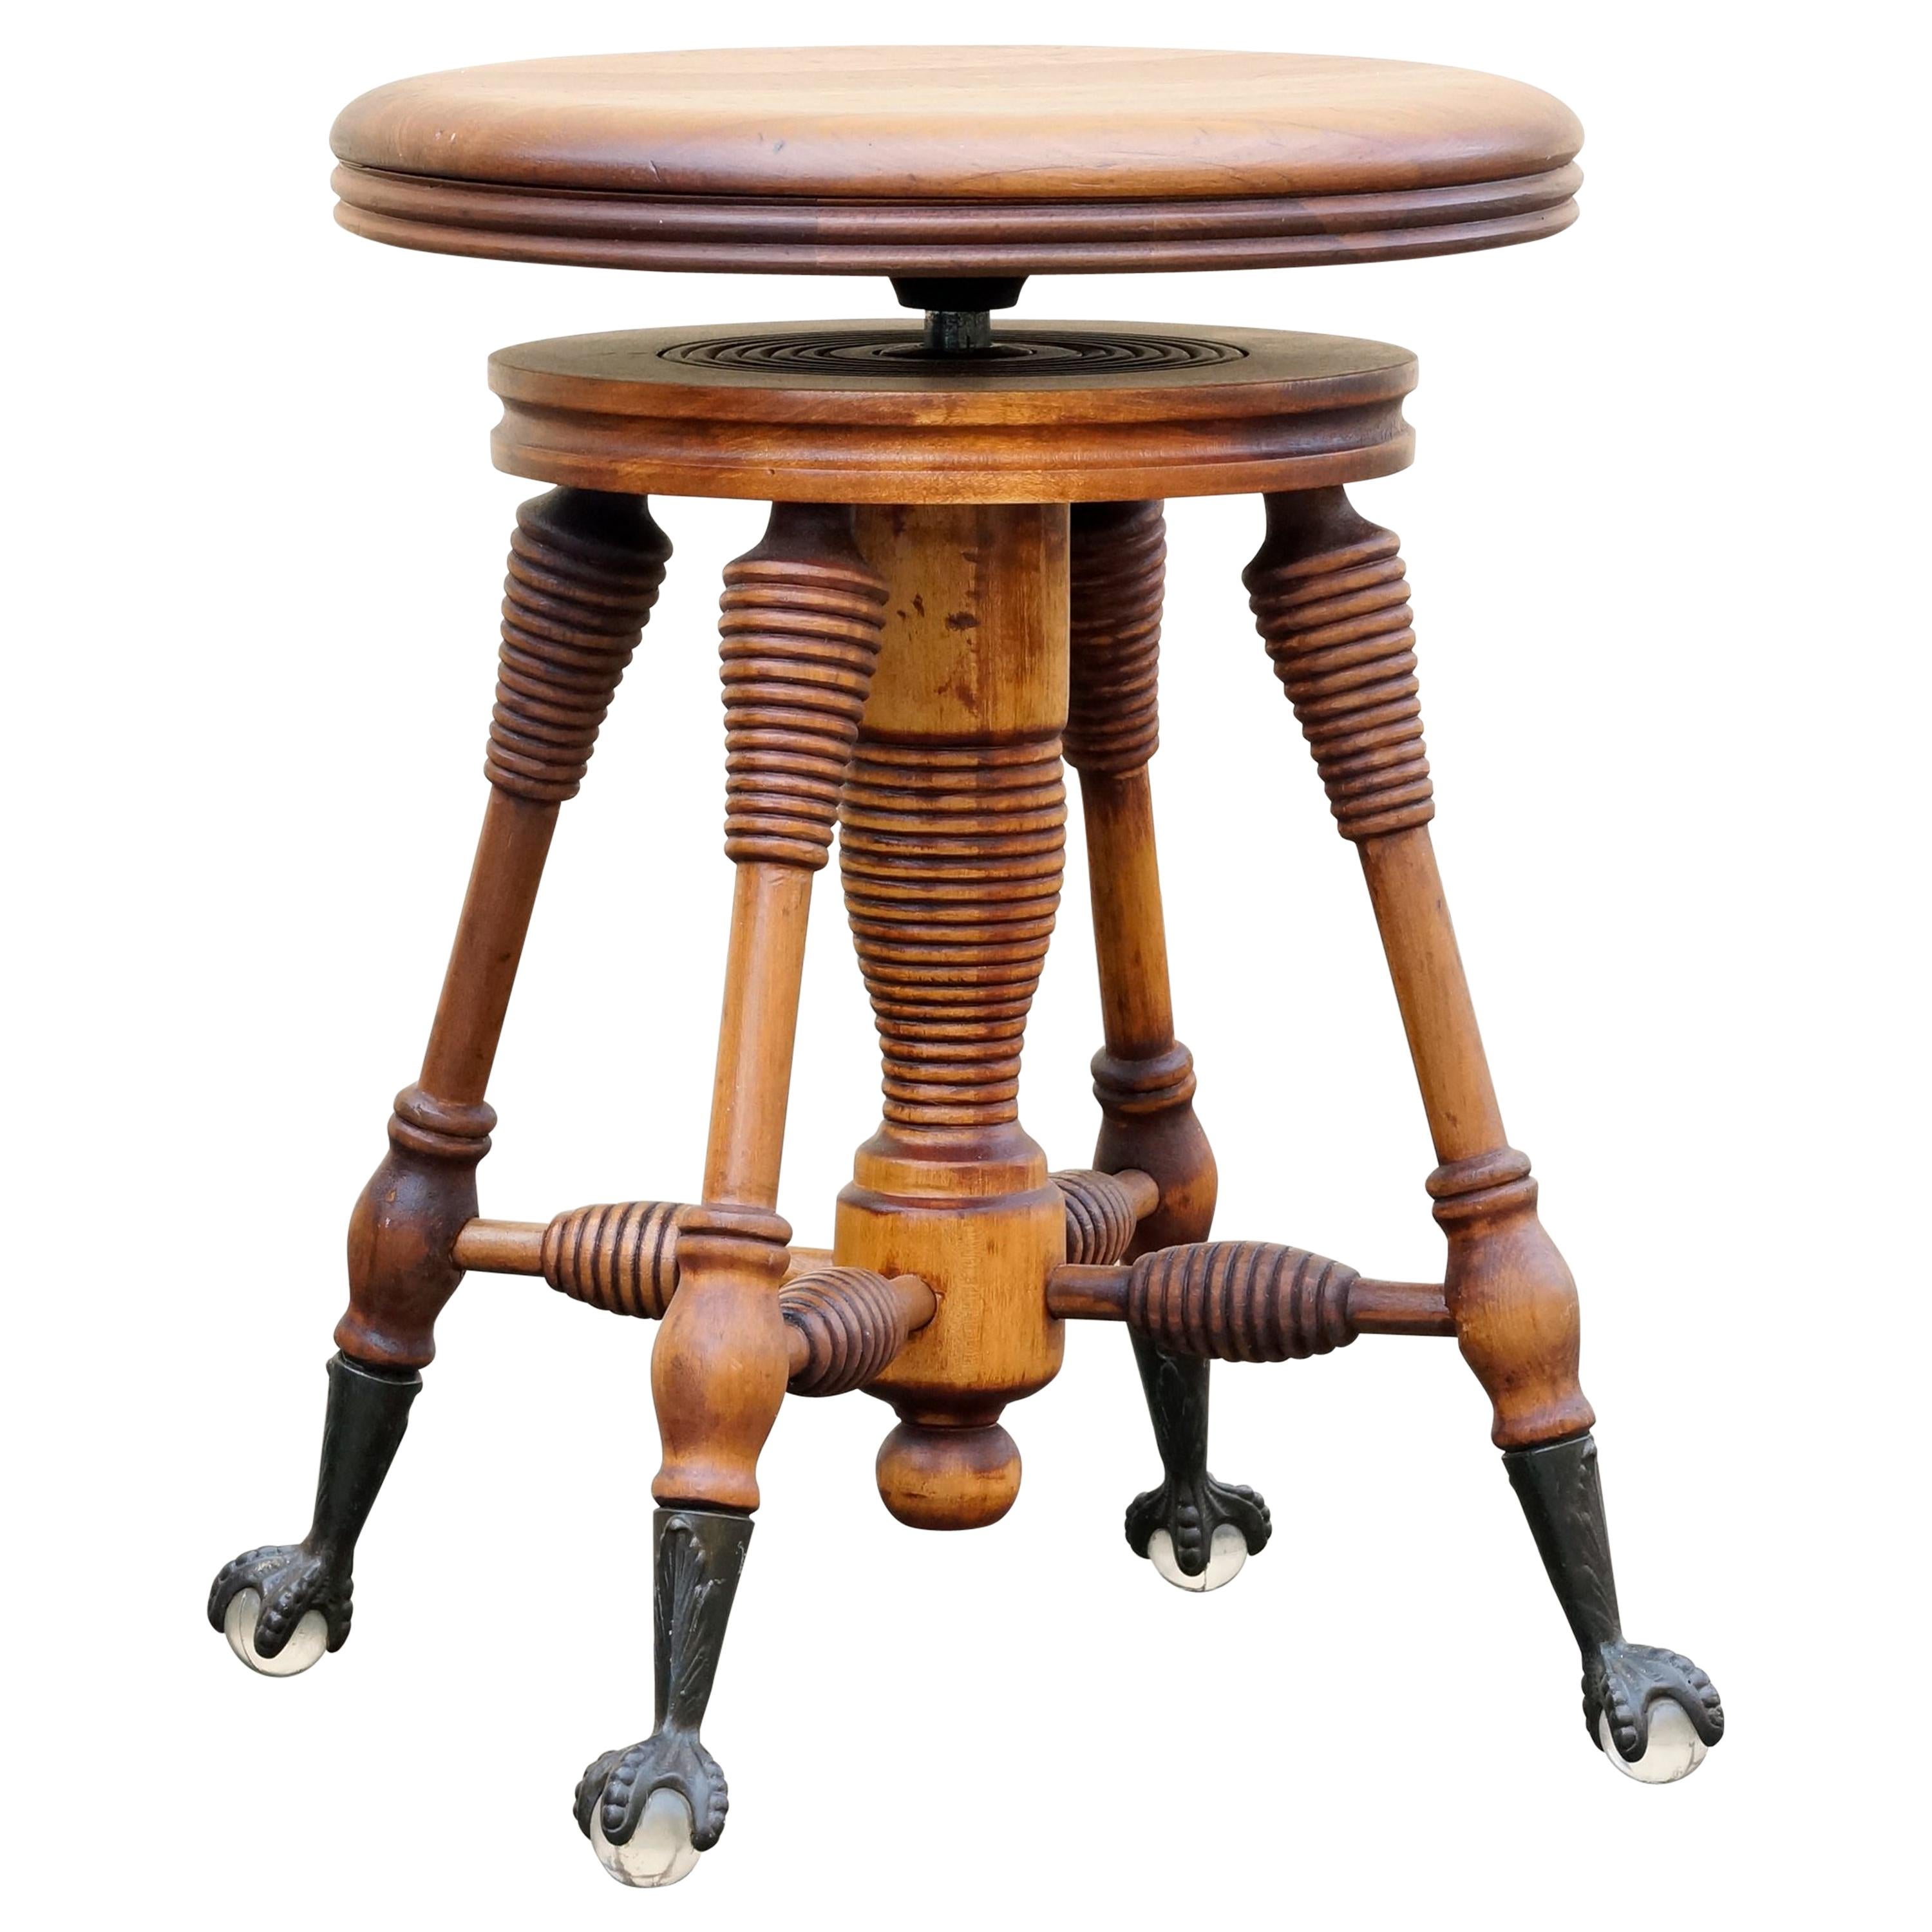 Antique Piano Stool with Claw and Glass Ball Foot